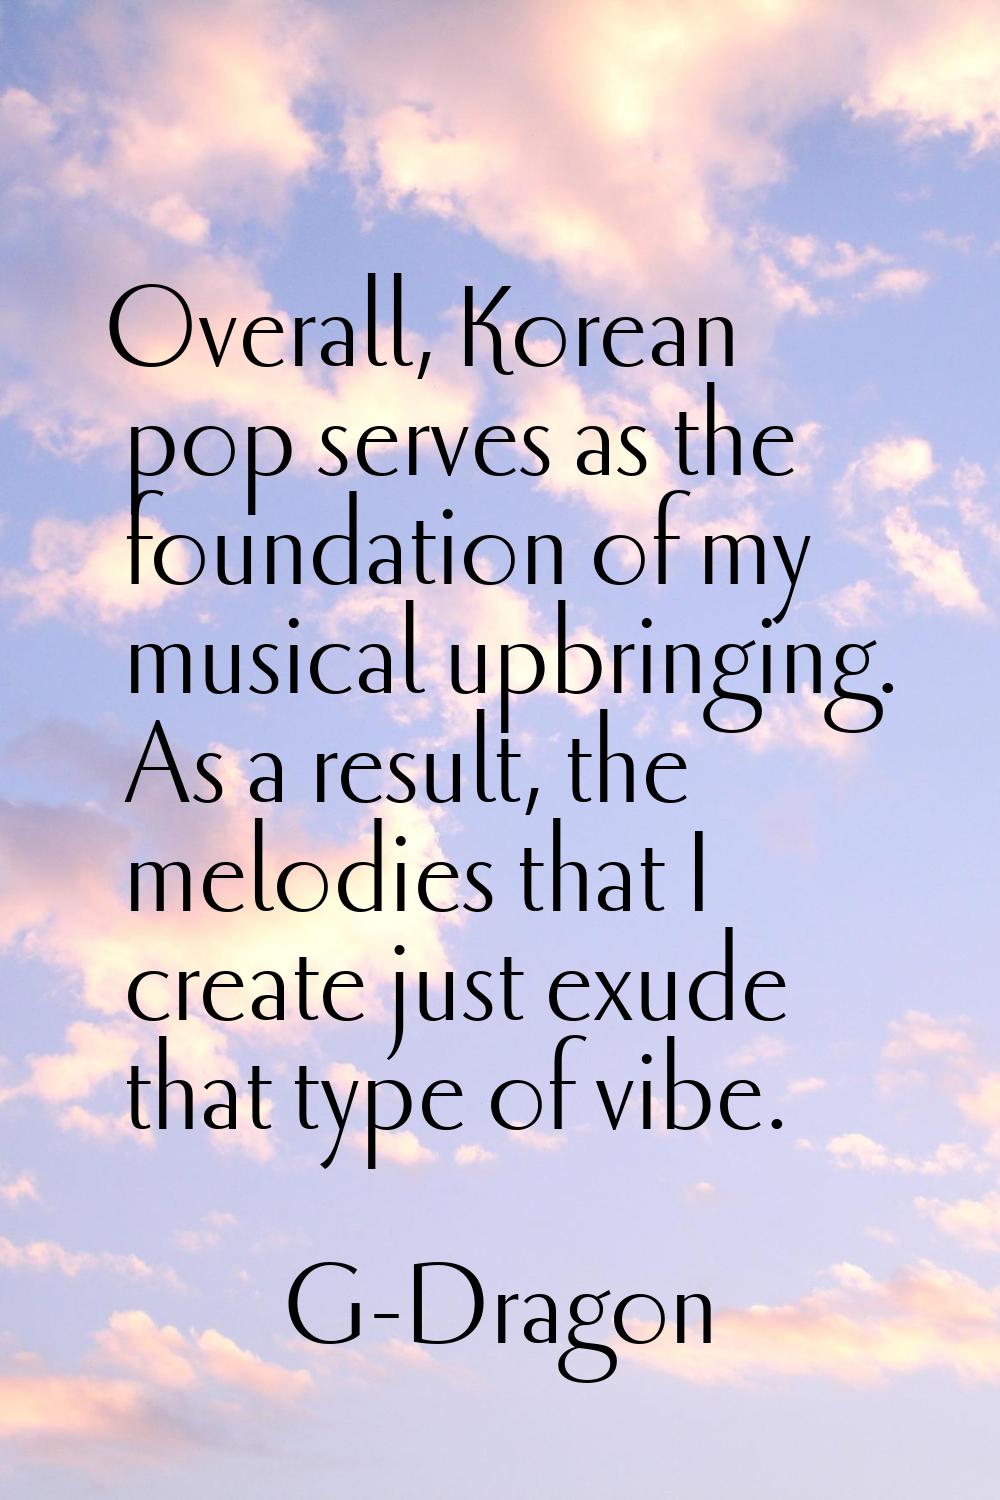 Overall, Korean pop serves as the foundation of my musical upbringing. As a result, the melodies th